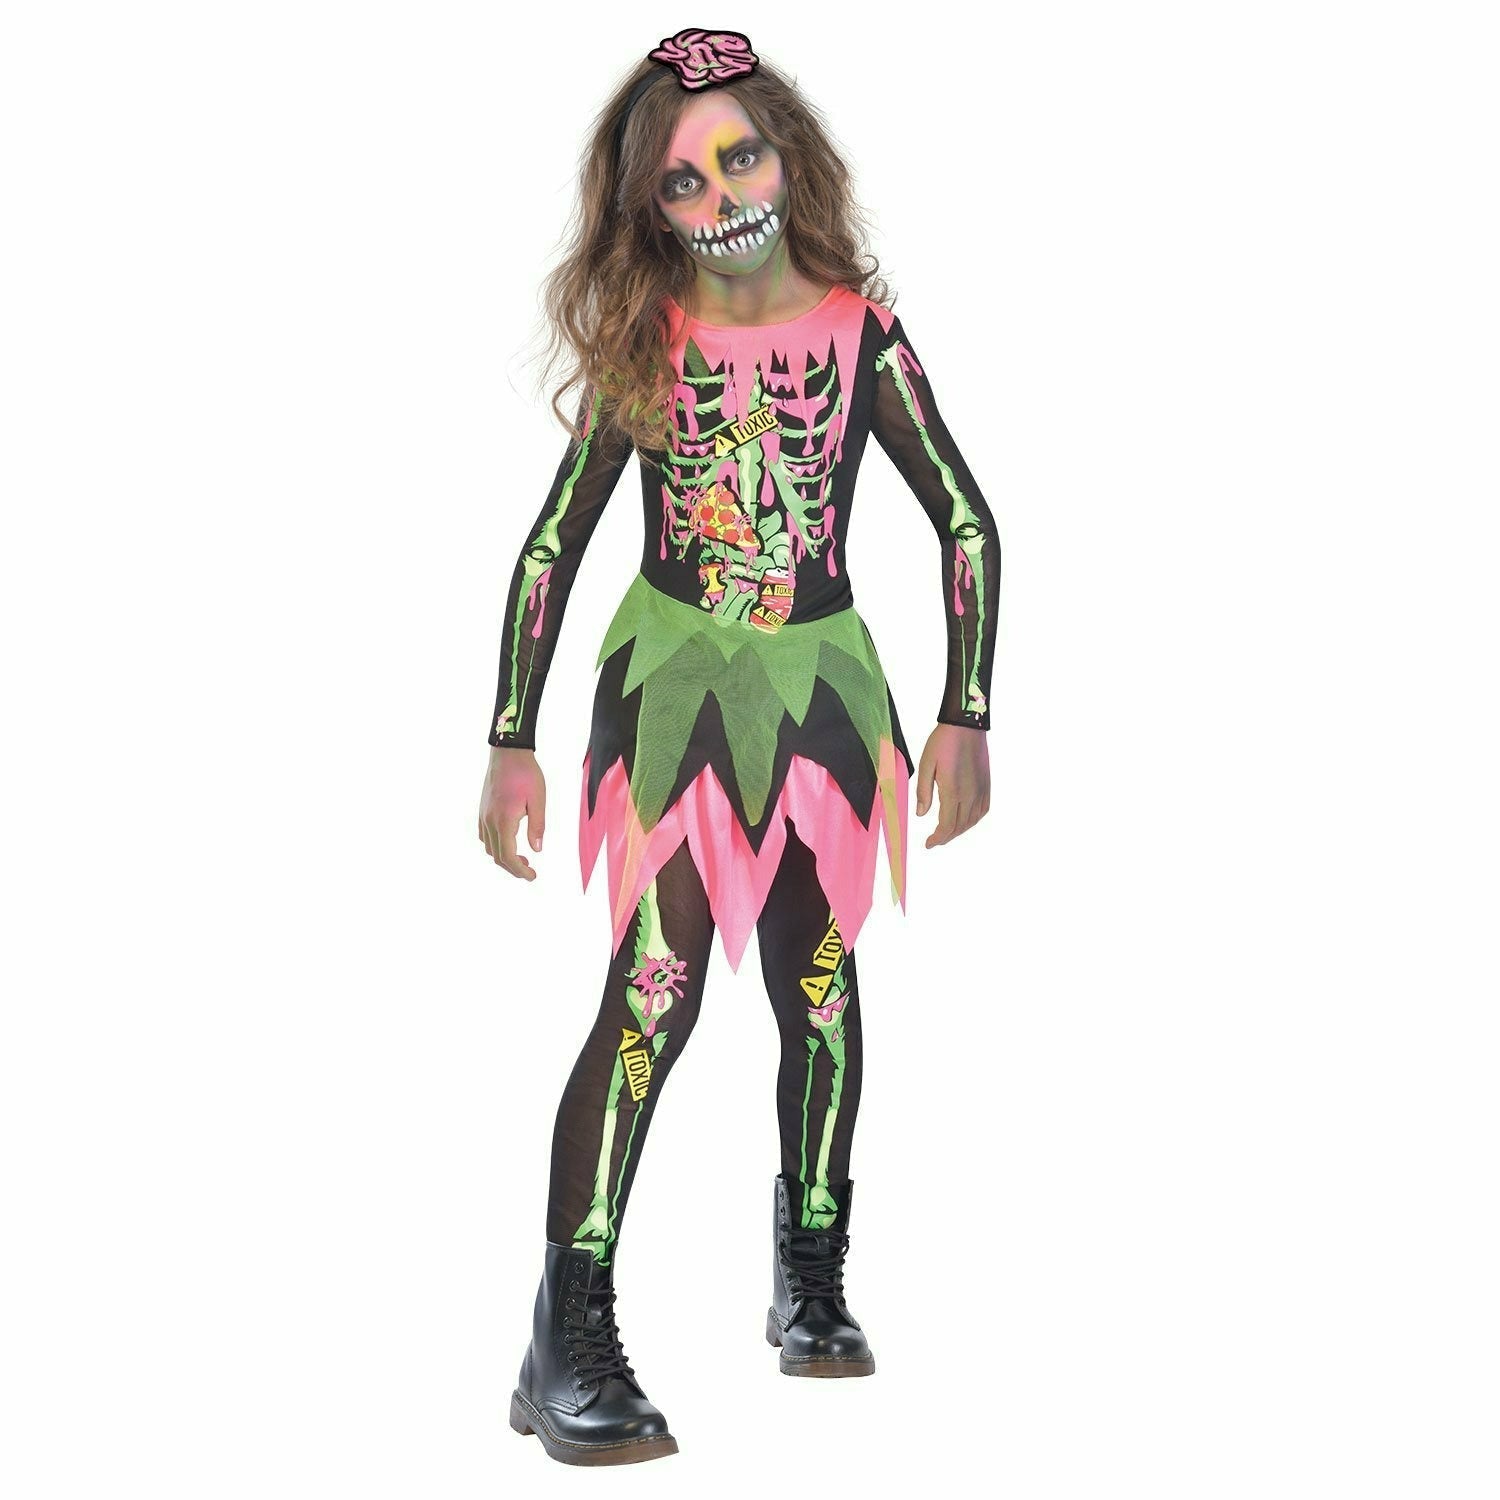 Amscan COSTUMES Large (12-14) Girls Deadly Zombie